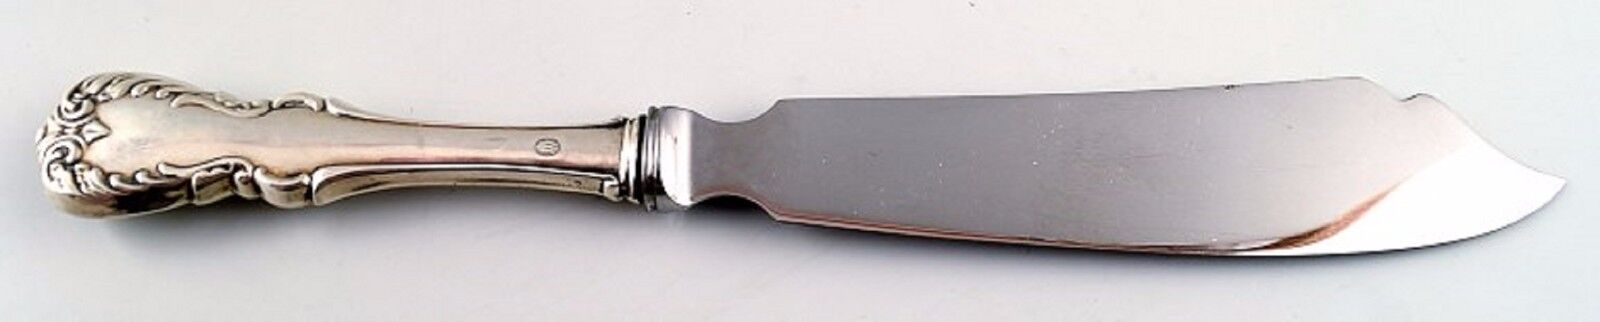 Silver cake knife. Early 20 c.